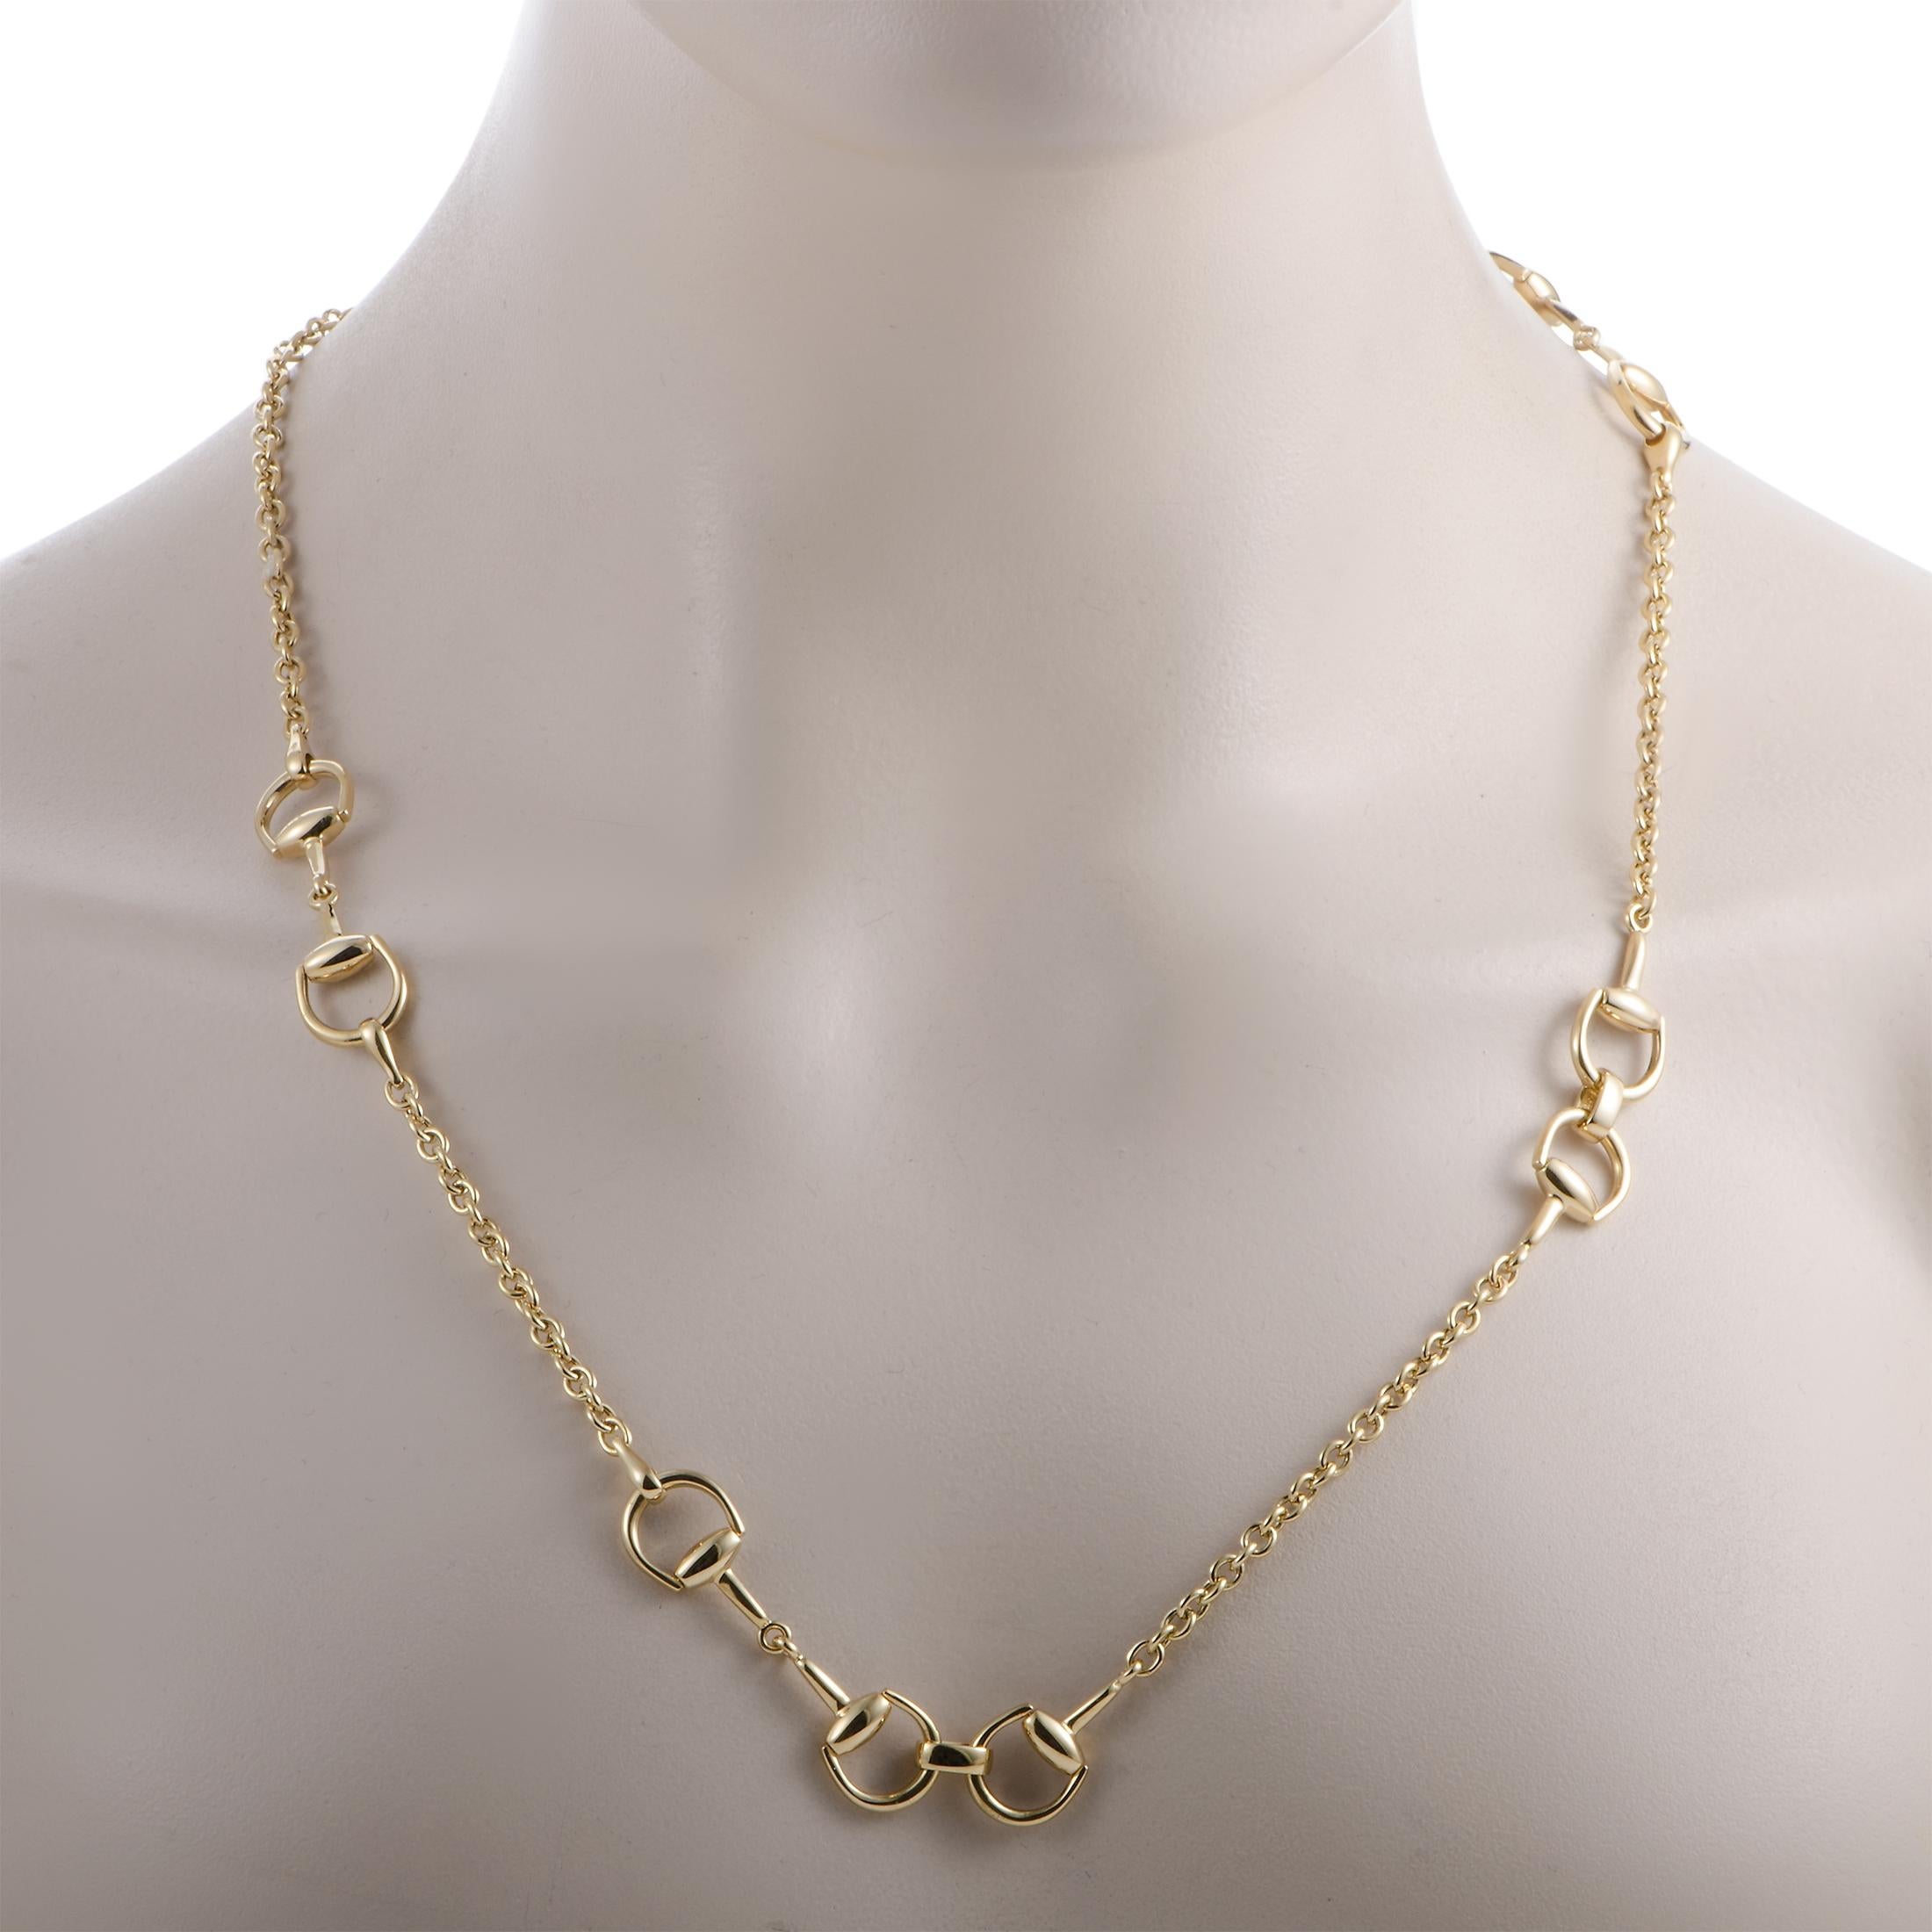 The Gucci “Horsebit” necklace is crafted from 18K yellow gold and weighs 51 grams, measuring 32” in length.
 
 The necklace is offered in brand new condition and includes the manufacturer’s box and papers.